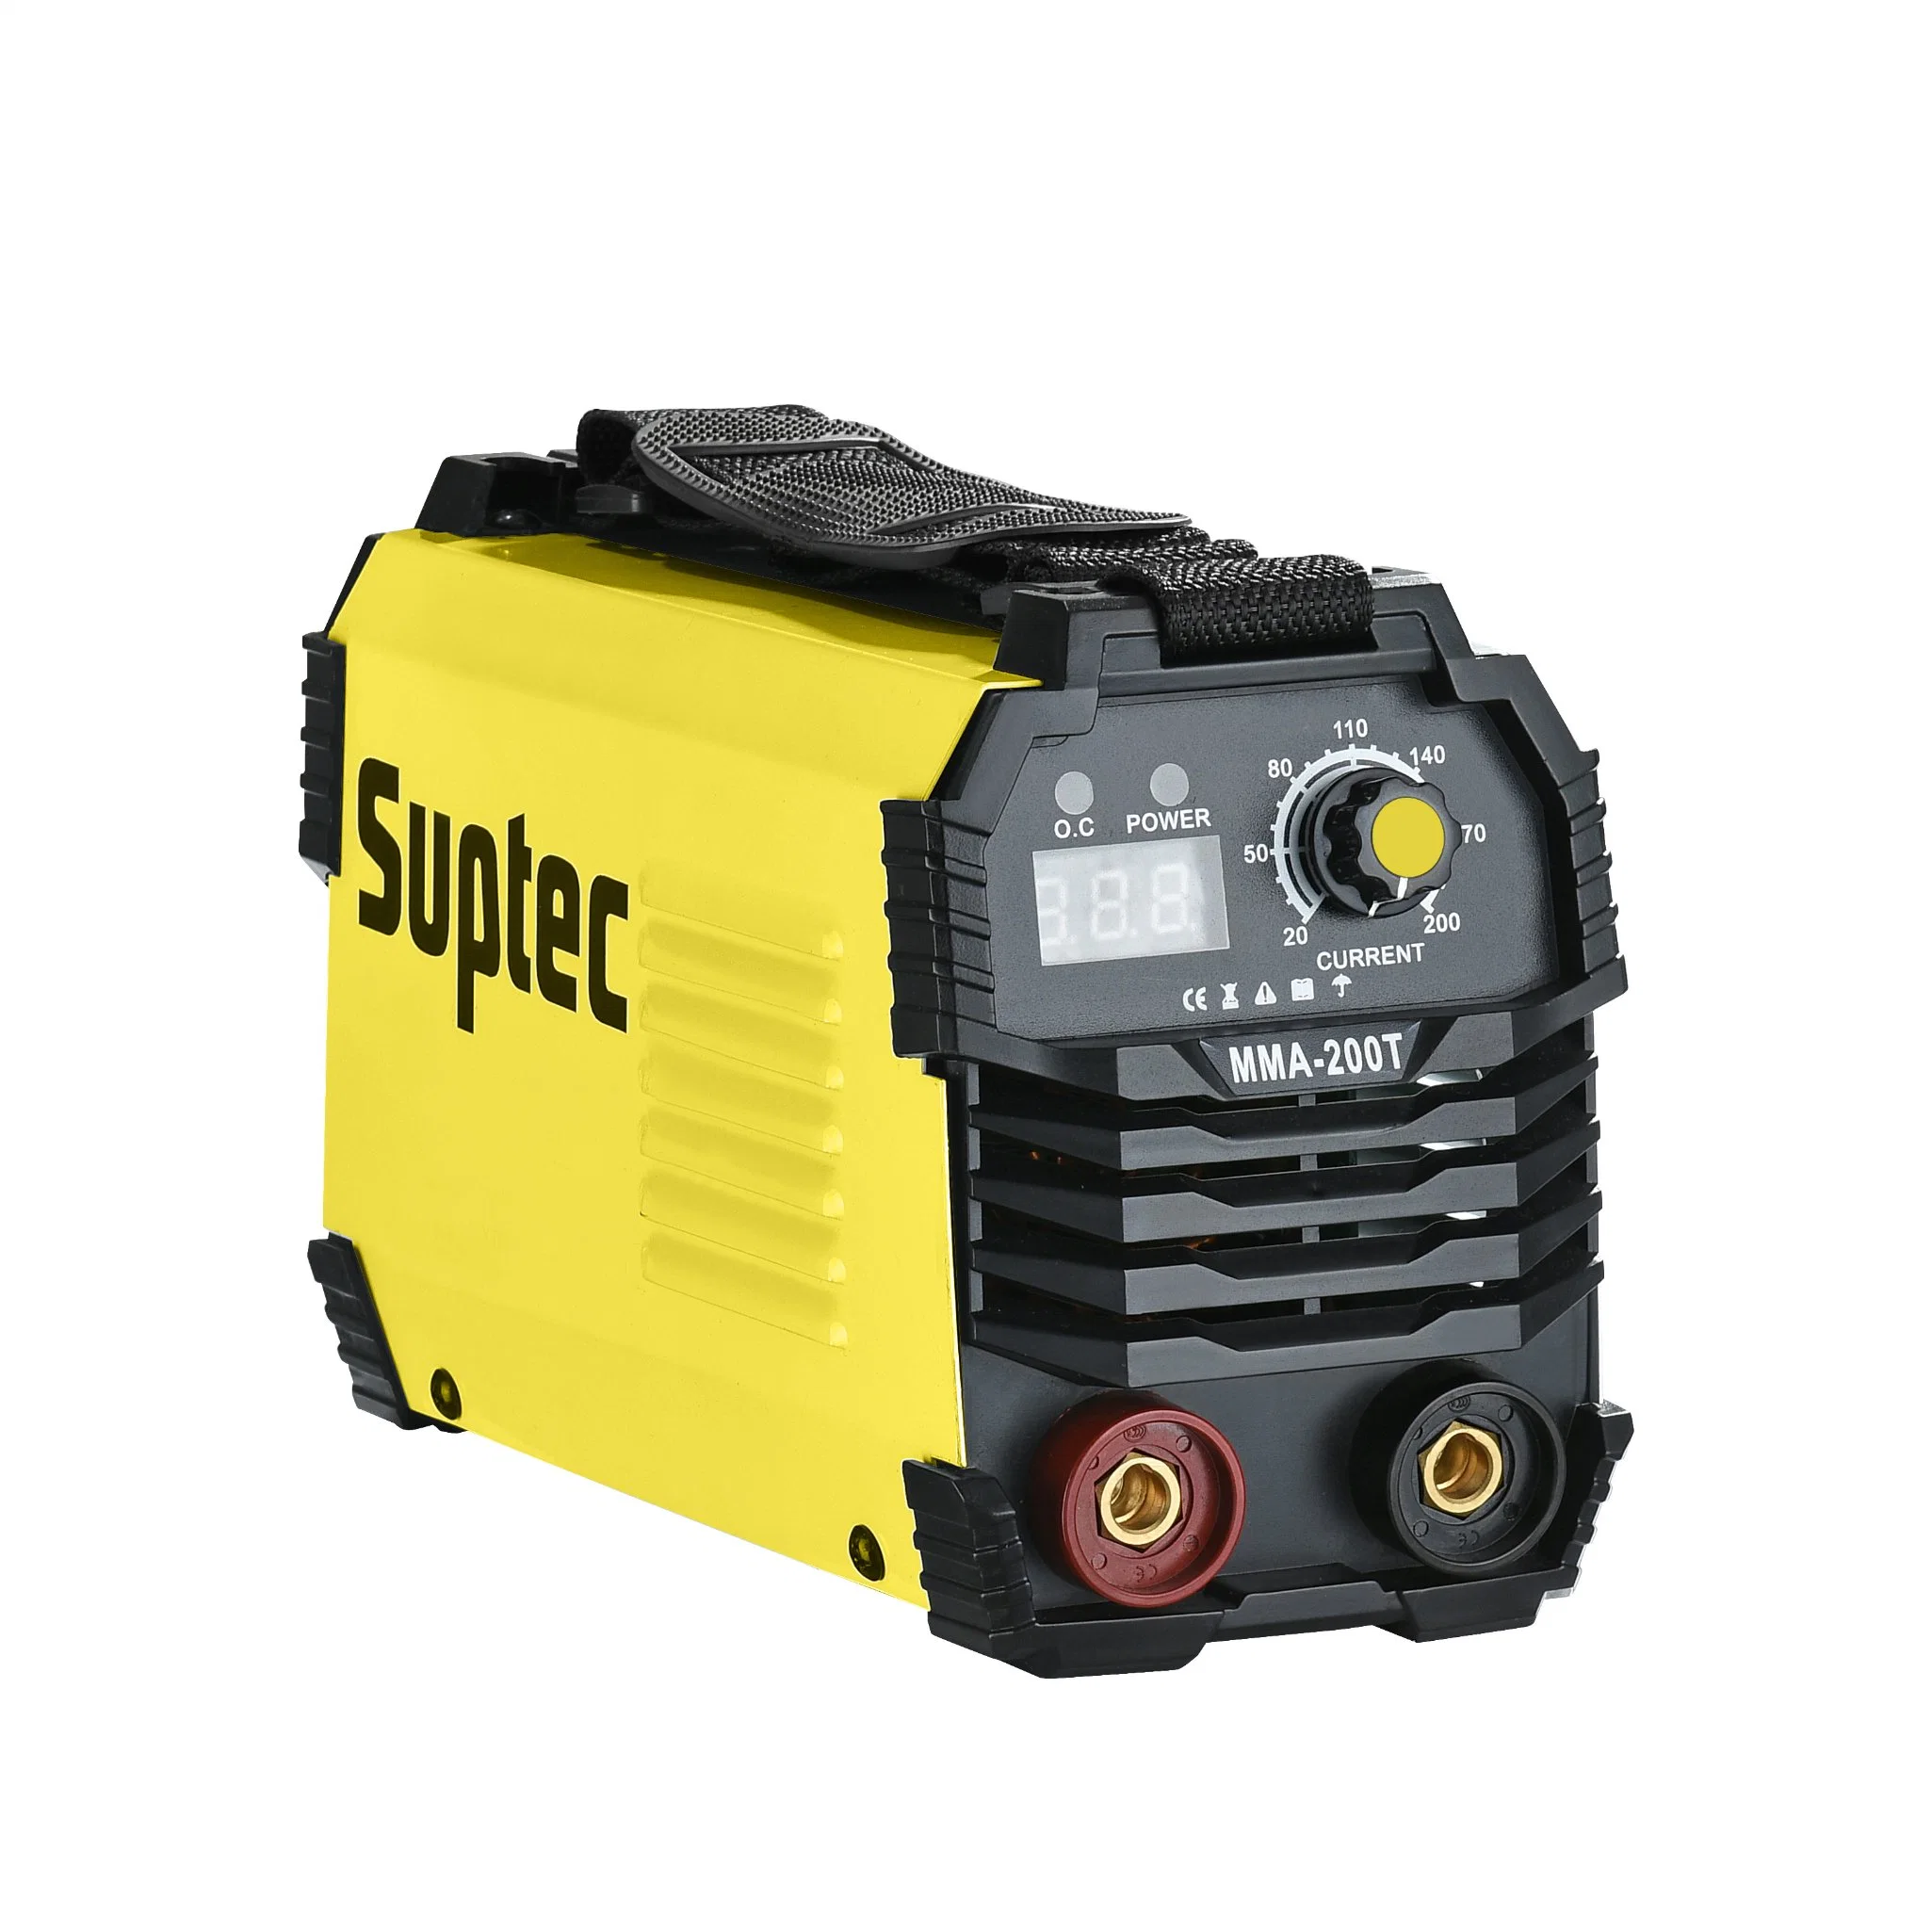 Suptec Small Iron Case 120A 140A 160A LCD Display Synergic Manual MMA Welding Machine Inverter Arc Welders